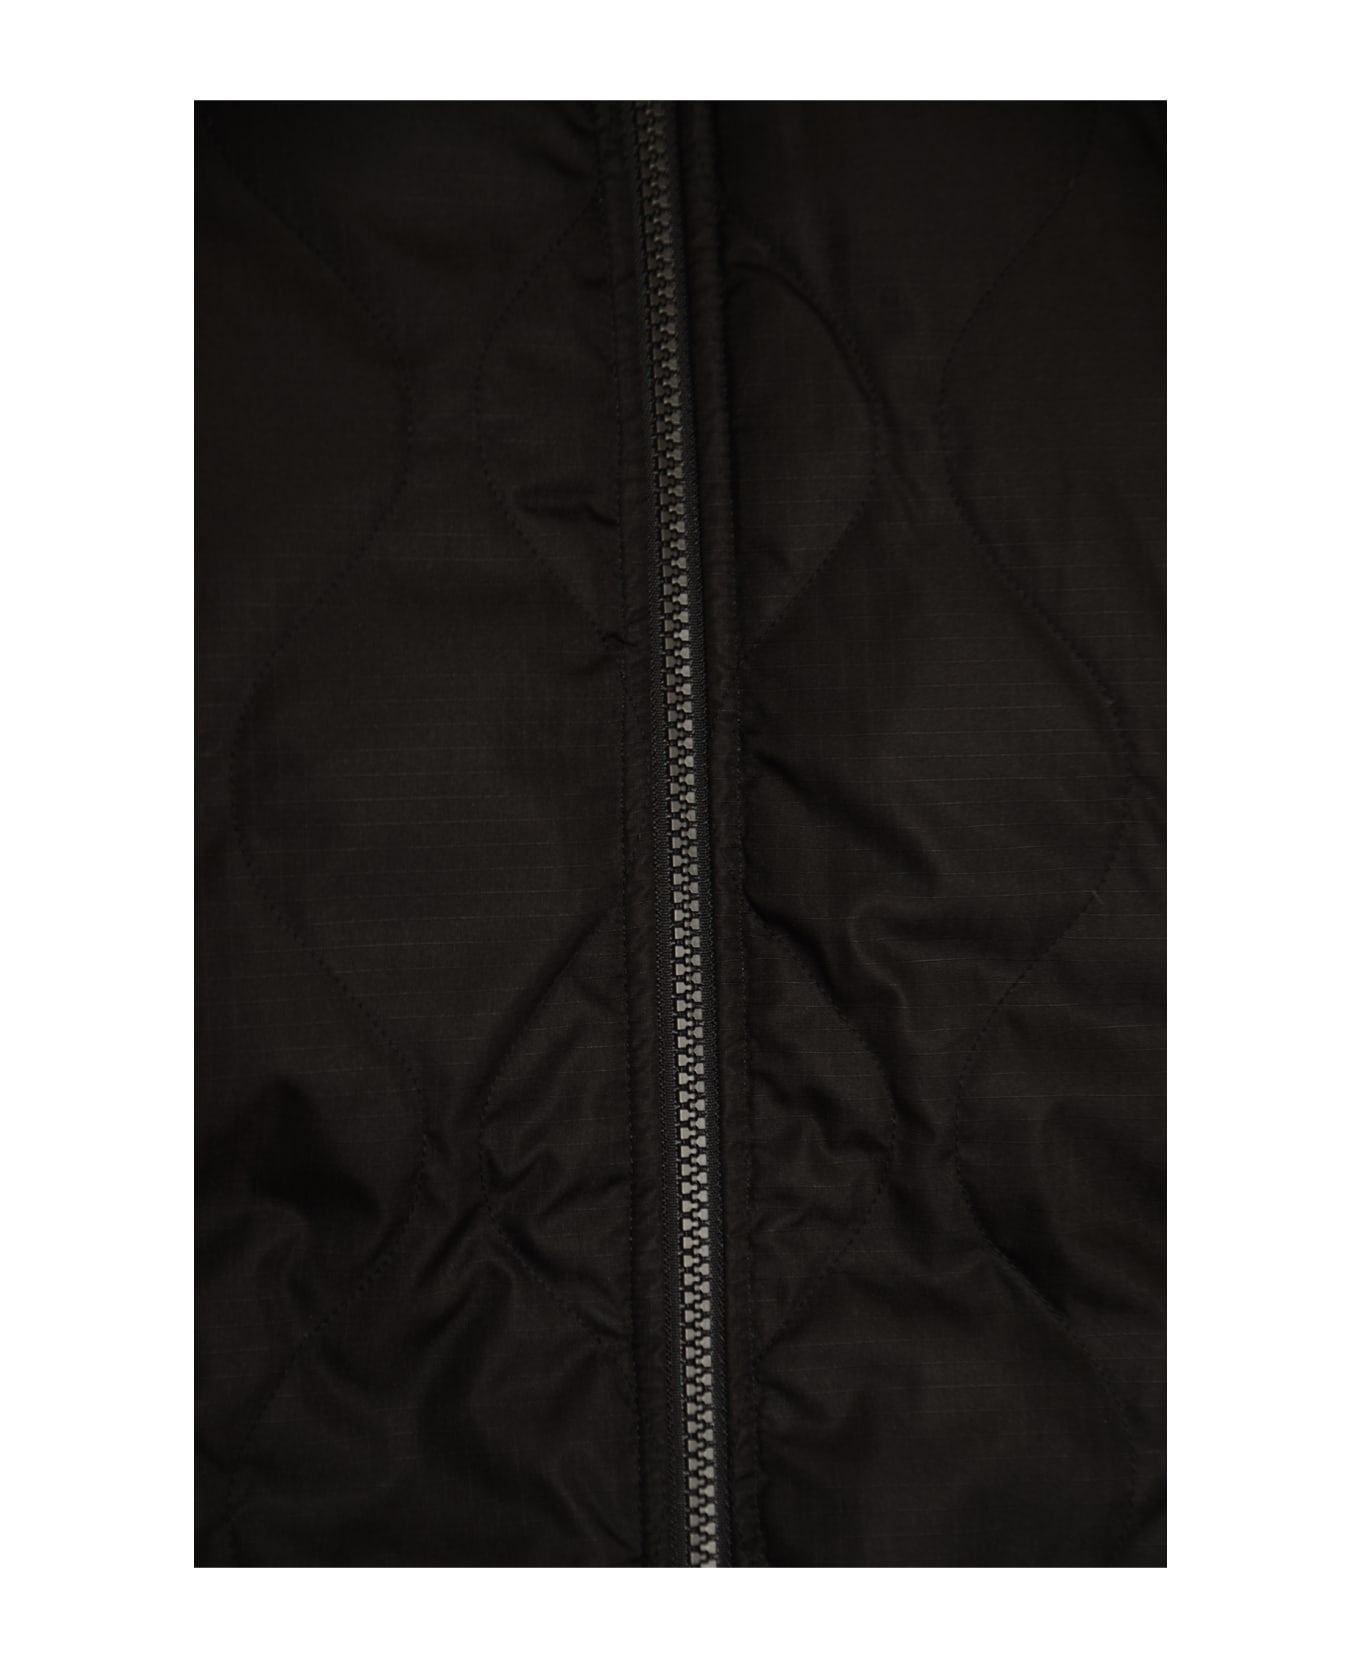 Taion High-neck Quilted Down Jacket - Black/Cream